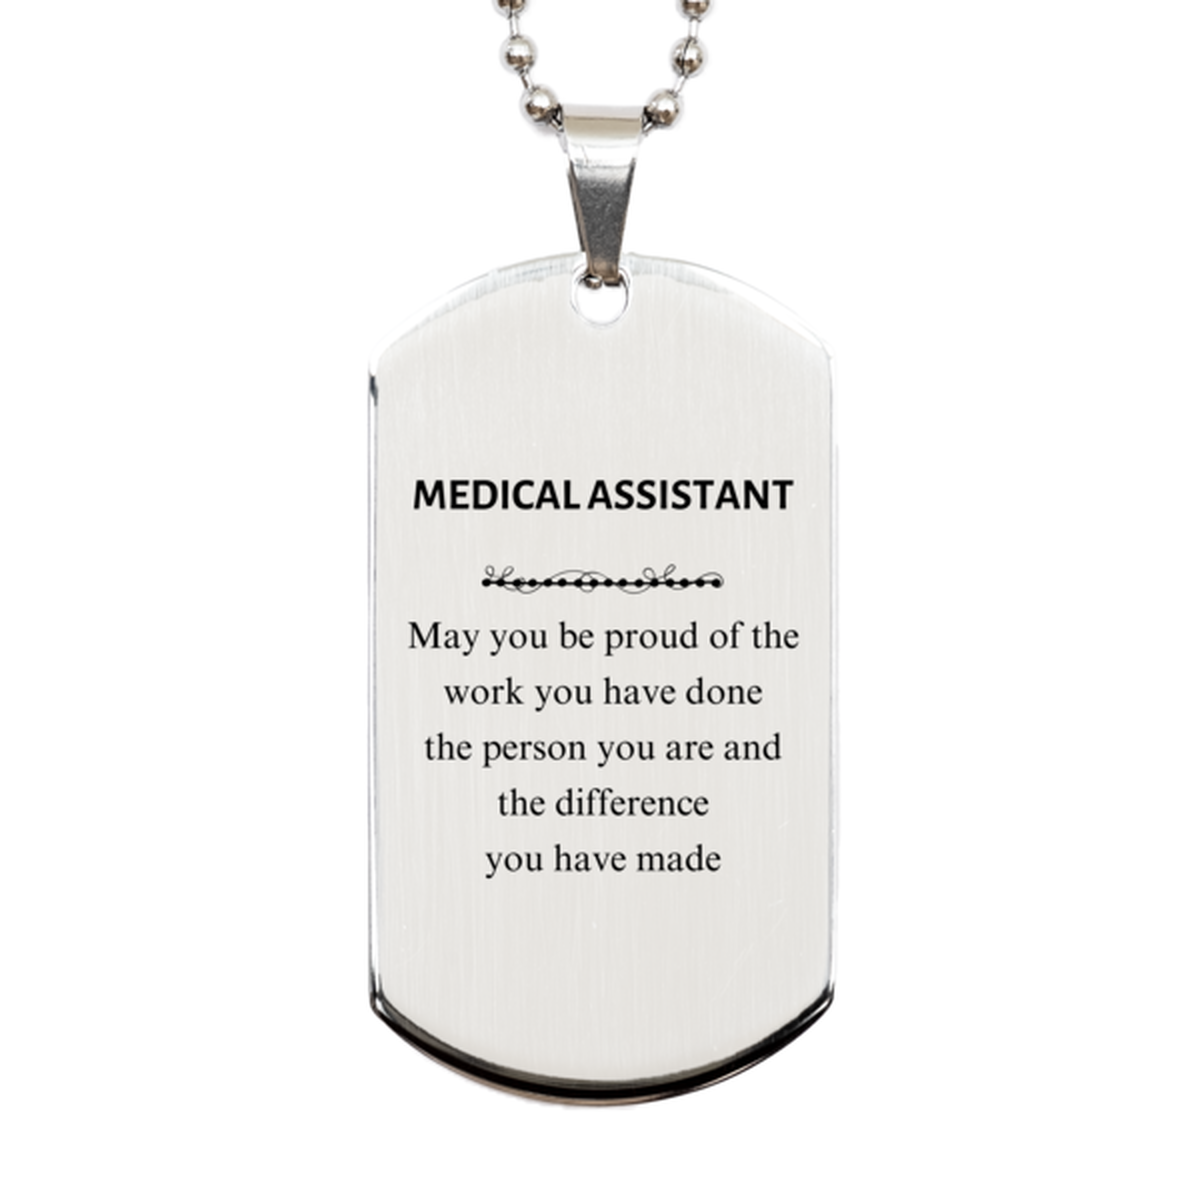 Medical Assistant May you be proud of the work you have done, Retirement Medical Assistant Silver Dog Tag for Colleague Appreciation Gifts Amazing for Medical Assistant